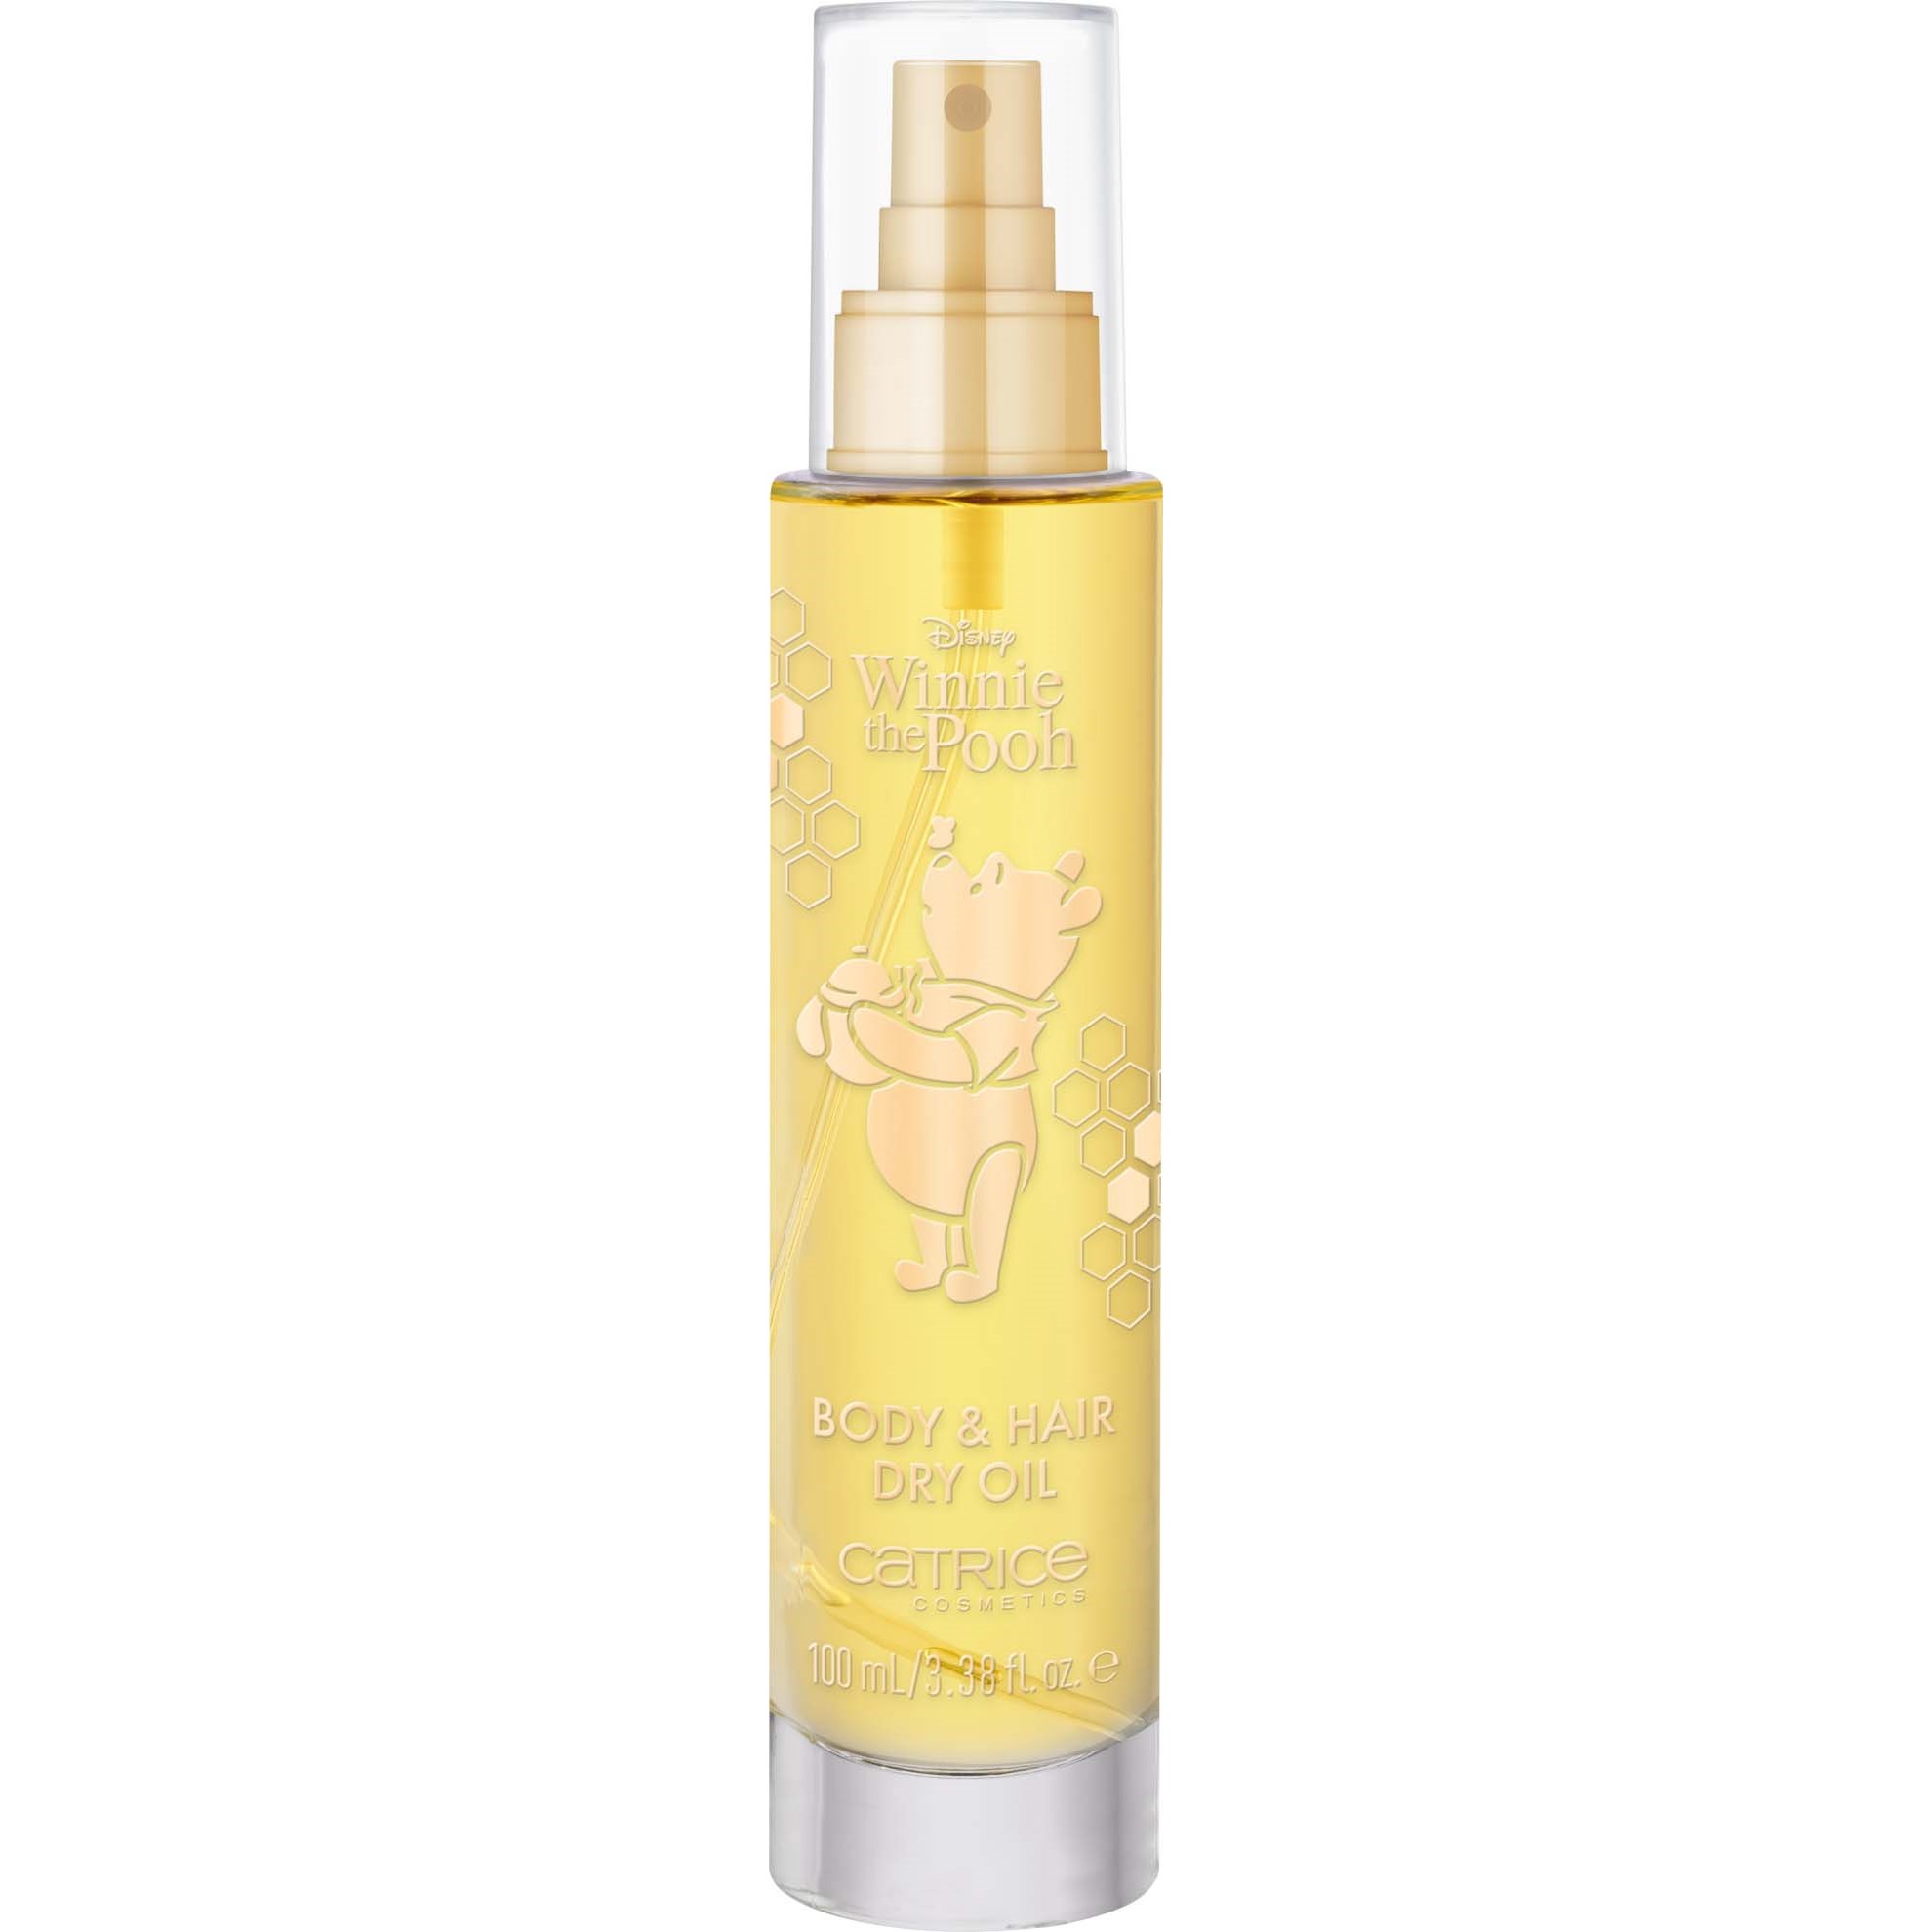 Catrice Disney Winnie The Pooh Body And Hair Dry Oil 100 ml